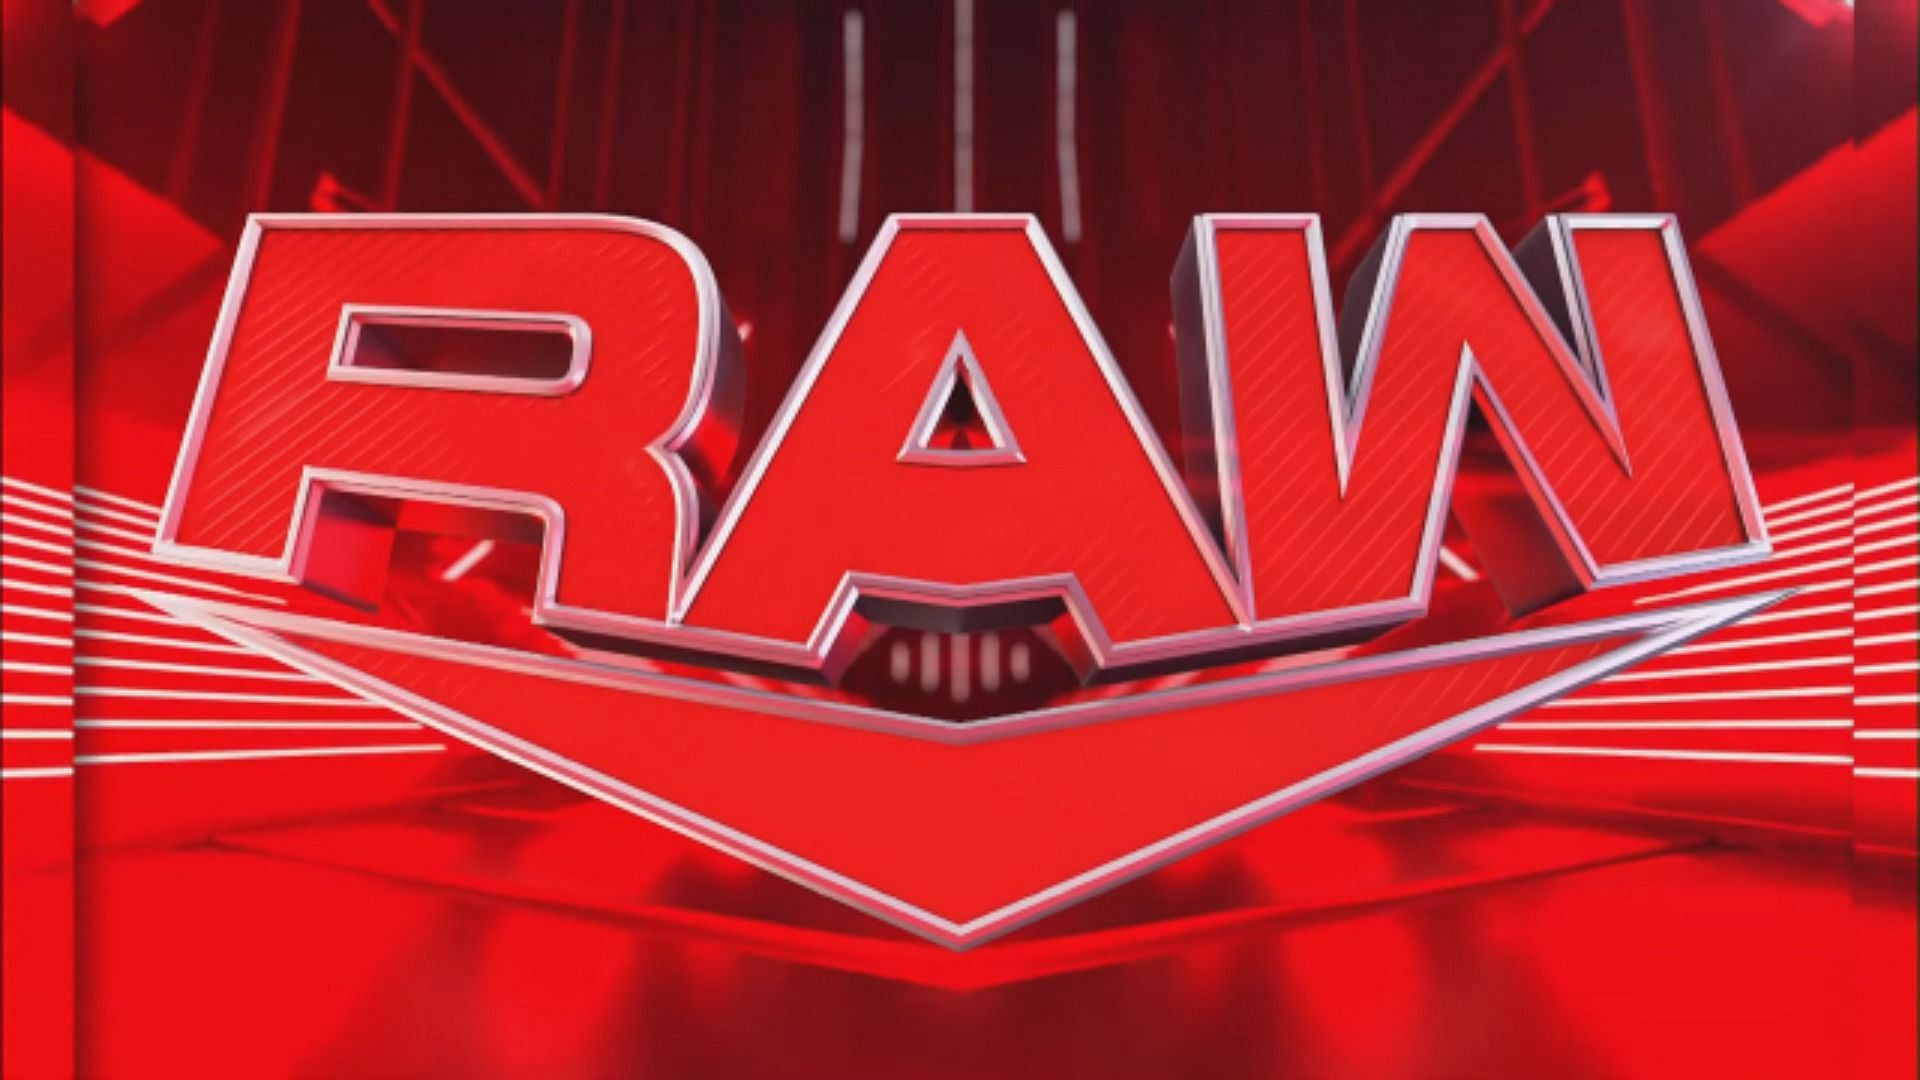 WWE RAW is coming to Scope Arena in Norfolk, Virginia.